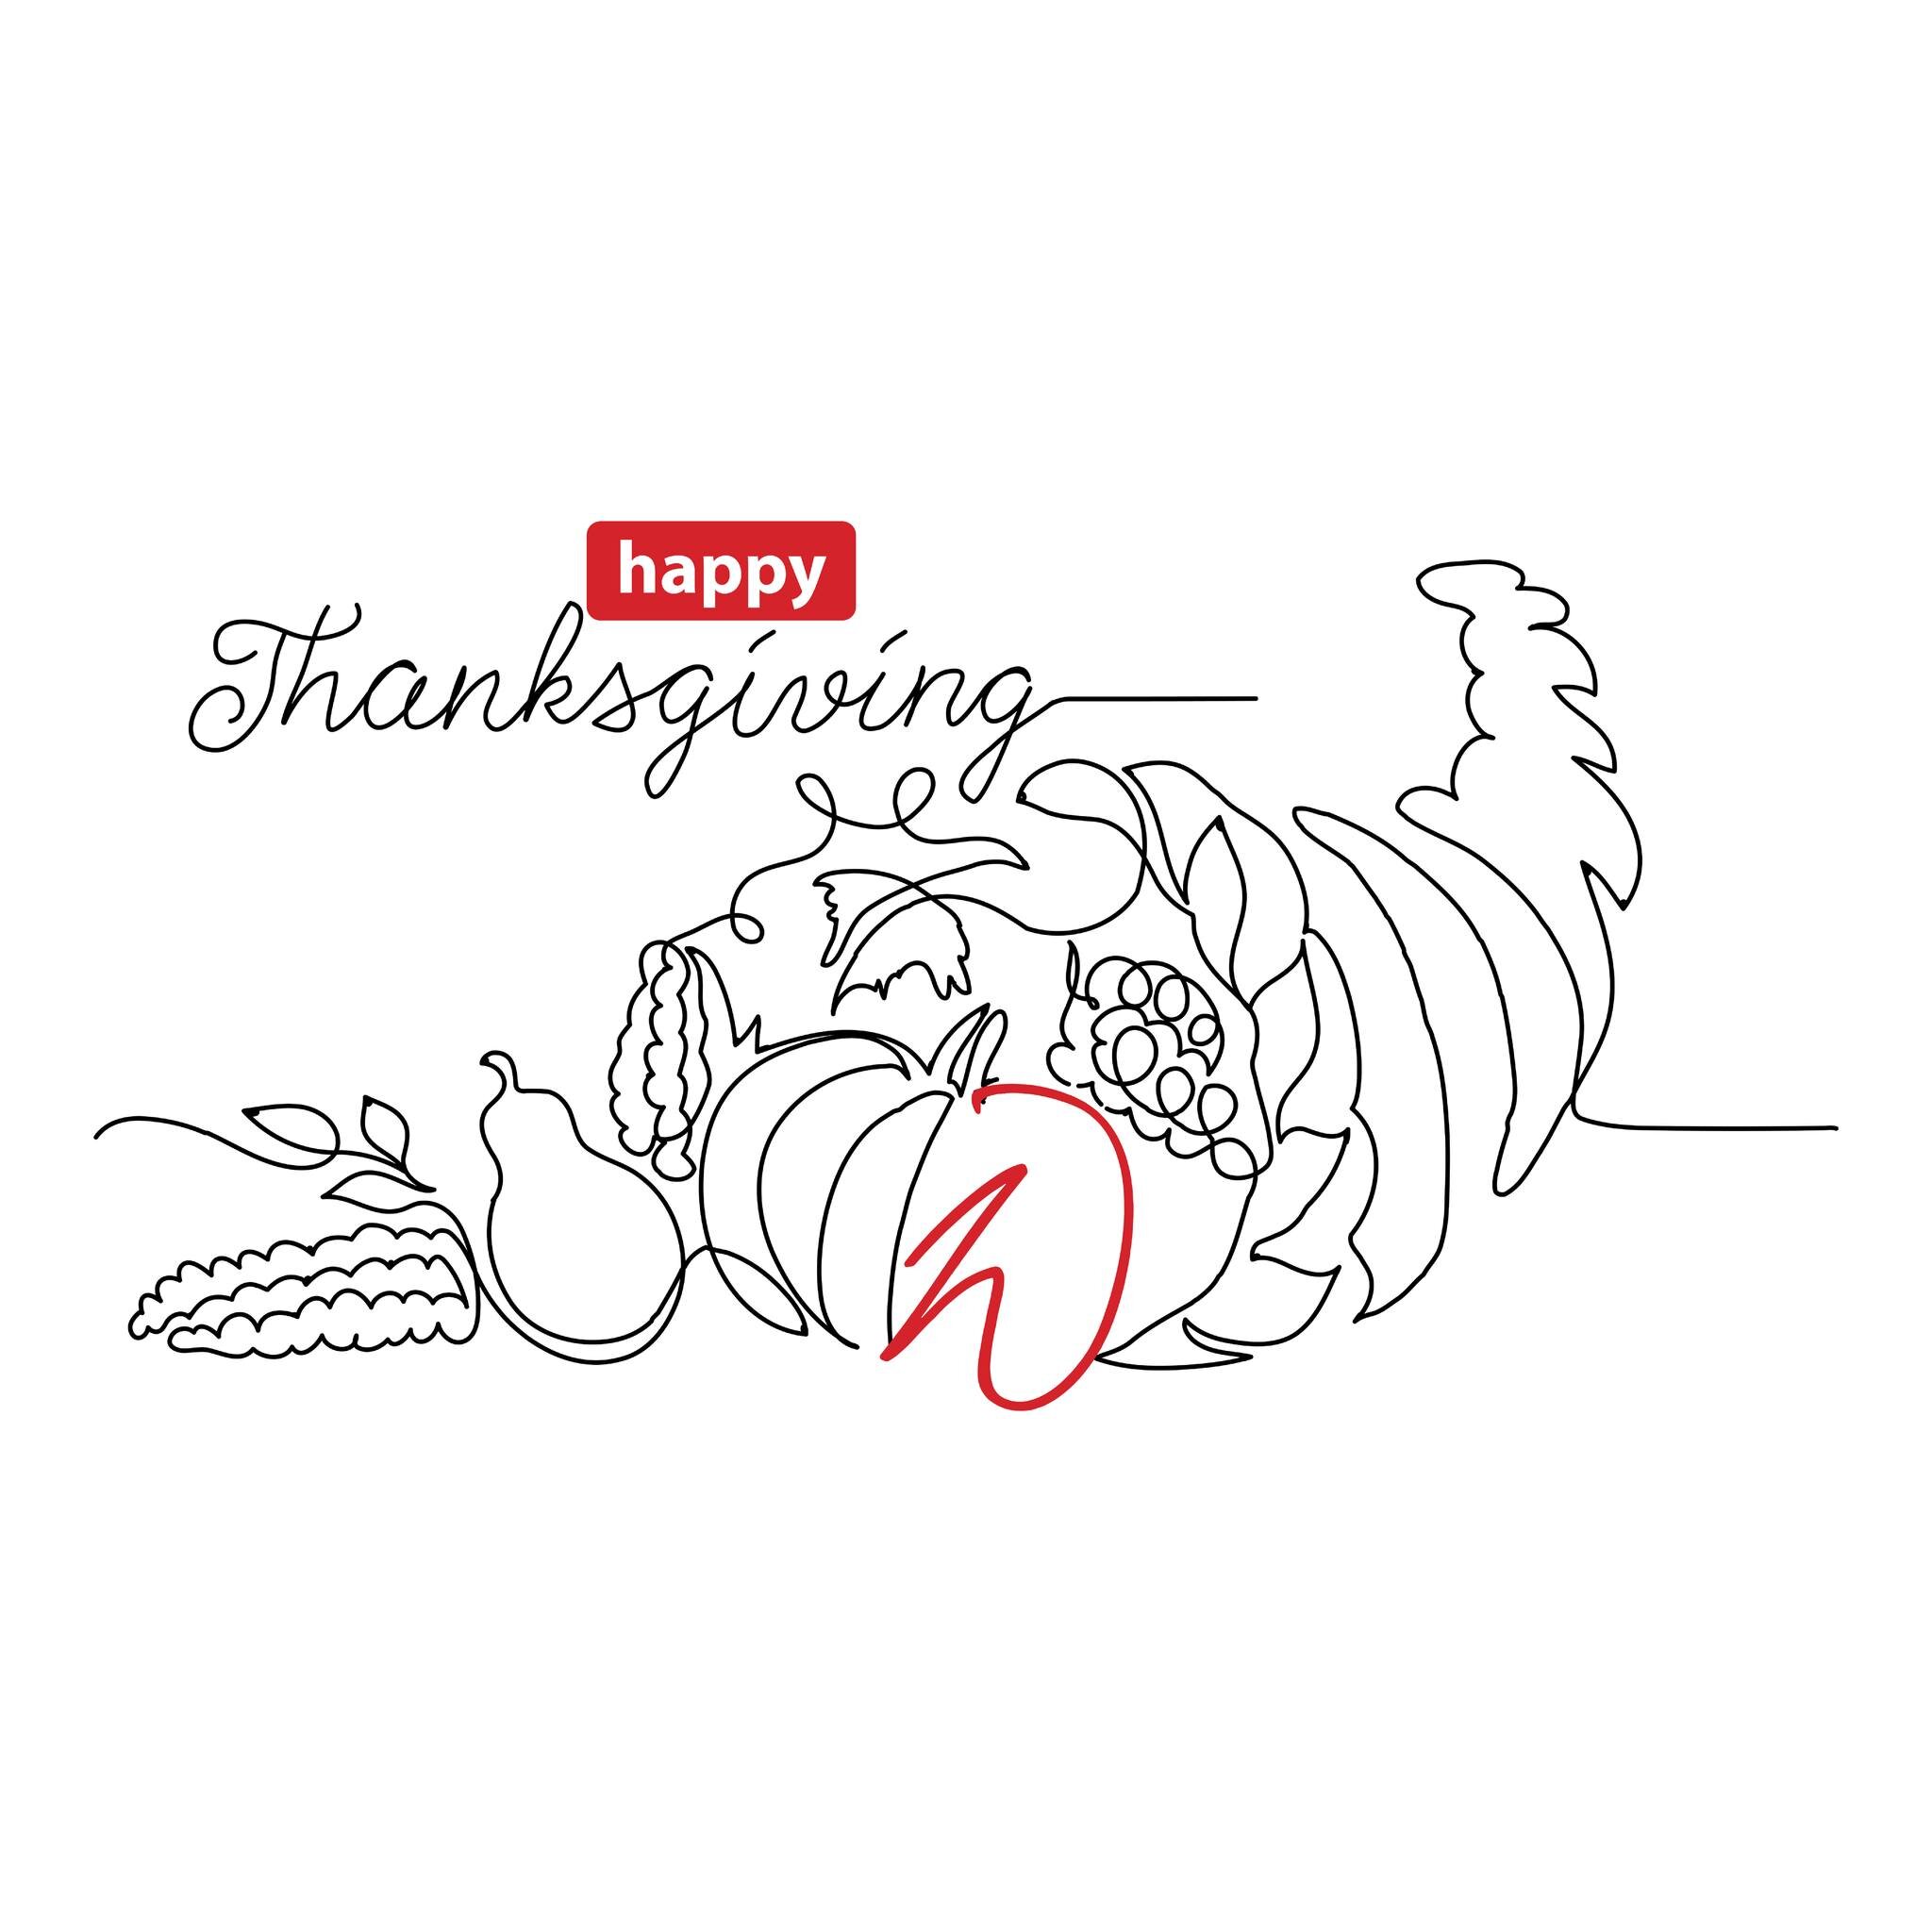 We are thankful for our professional and personal growth in 2022. We hope everyone has a happy and peaceful Thanksgiving.